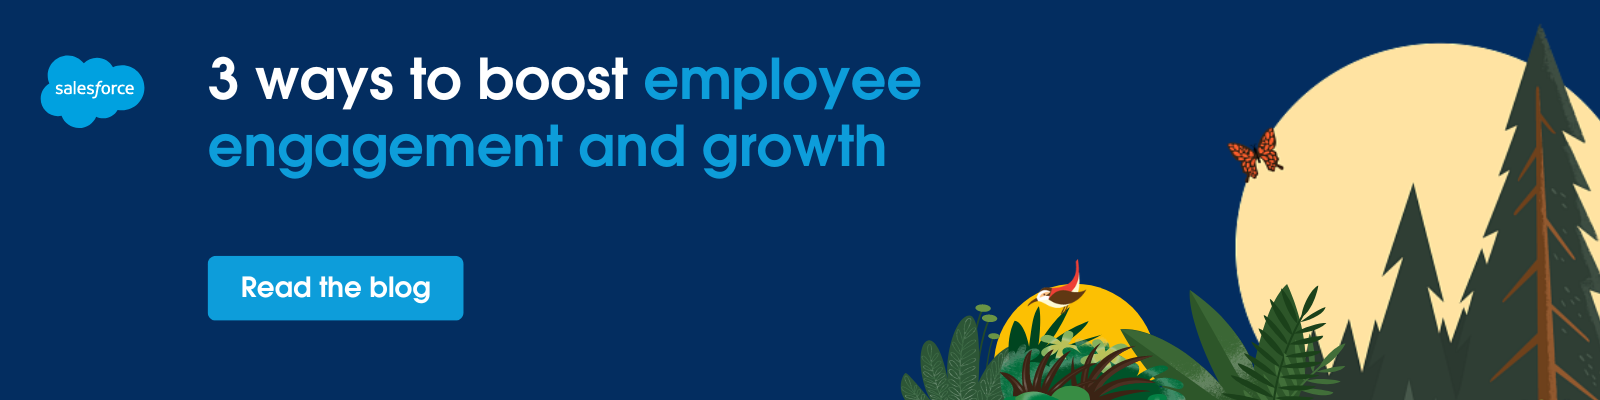 3 ways to boost employee engagement and growth